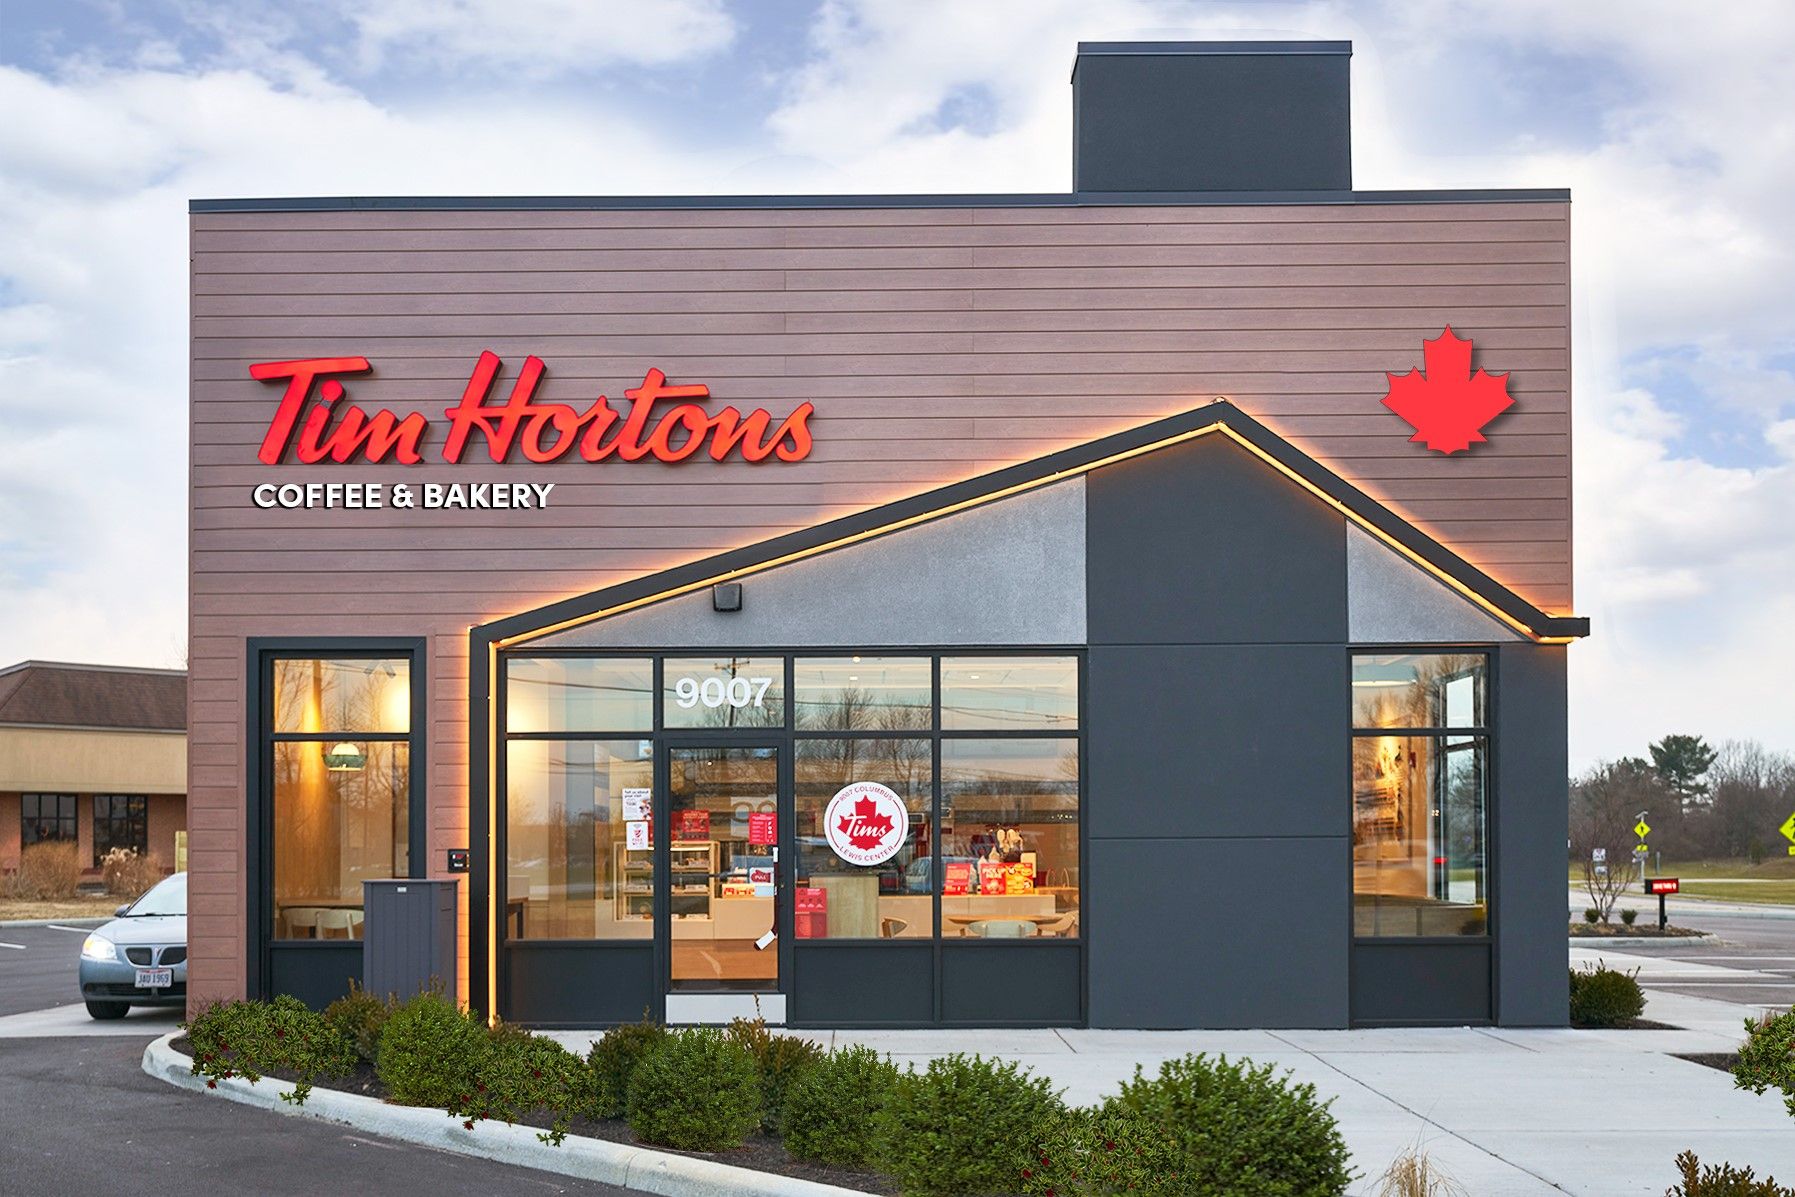 Canadian Donut Chain Tim Hortons To Open In San Antonio